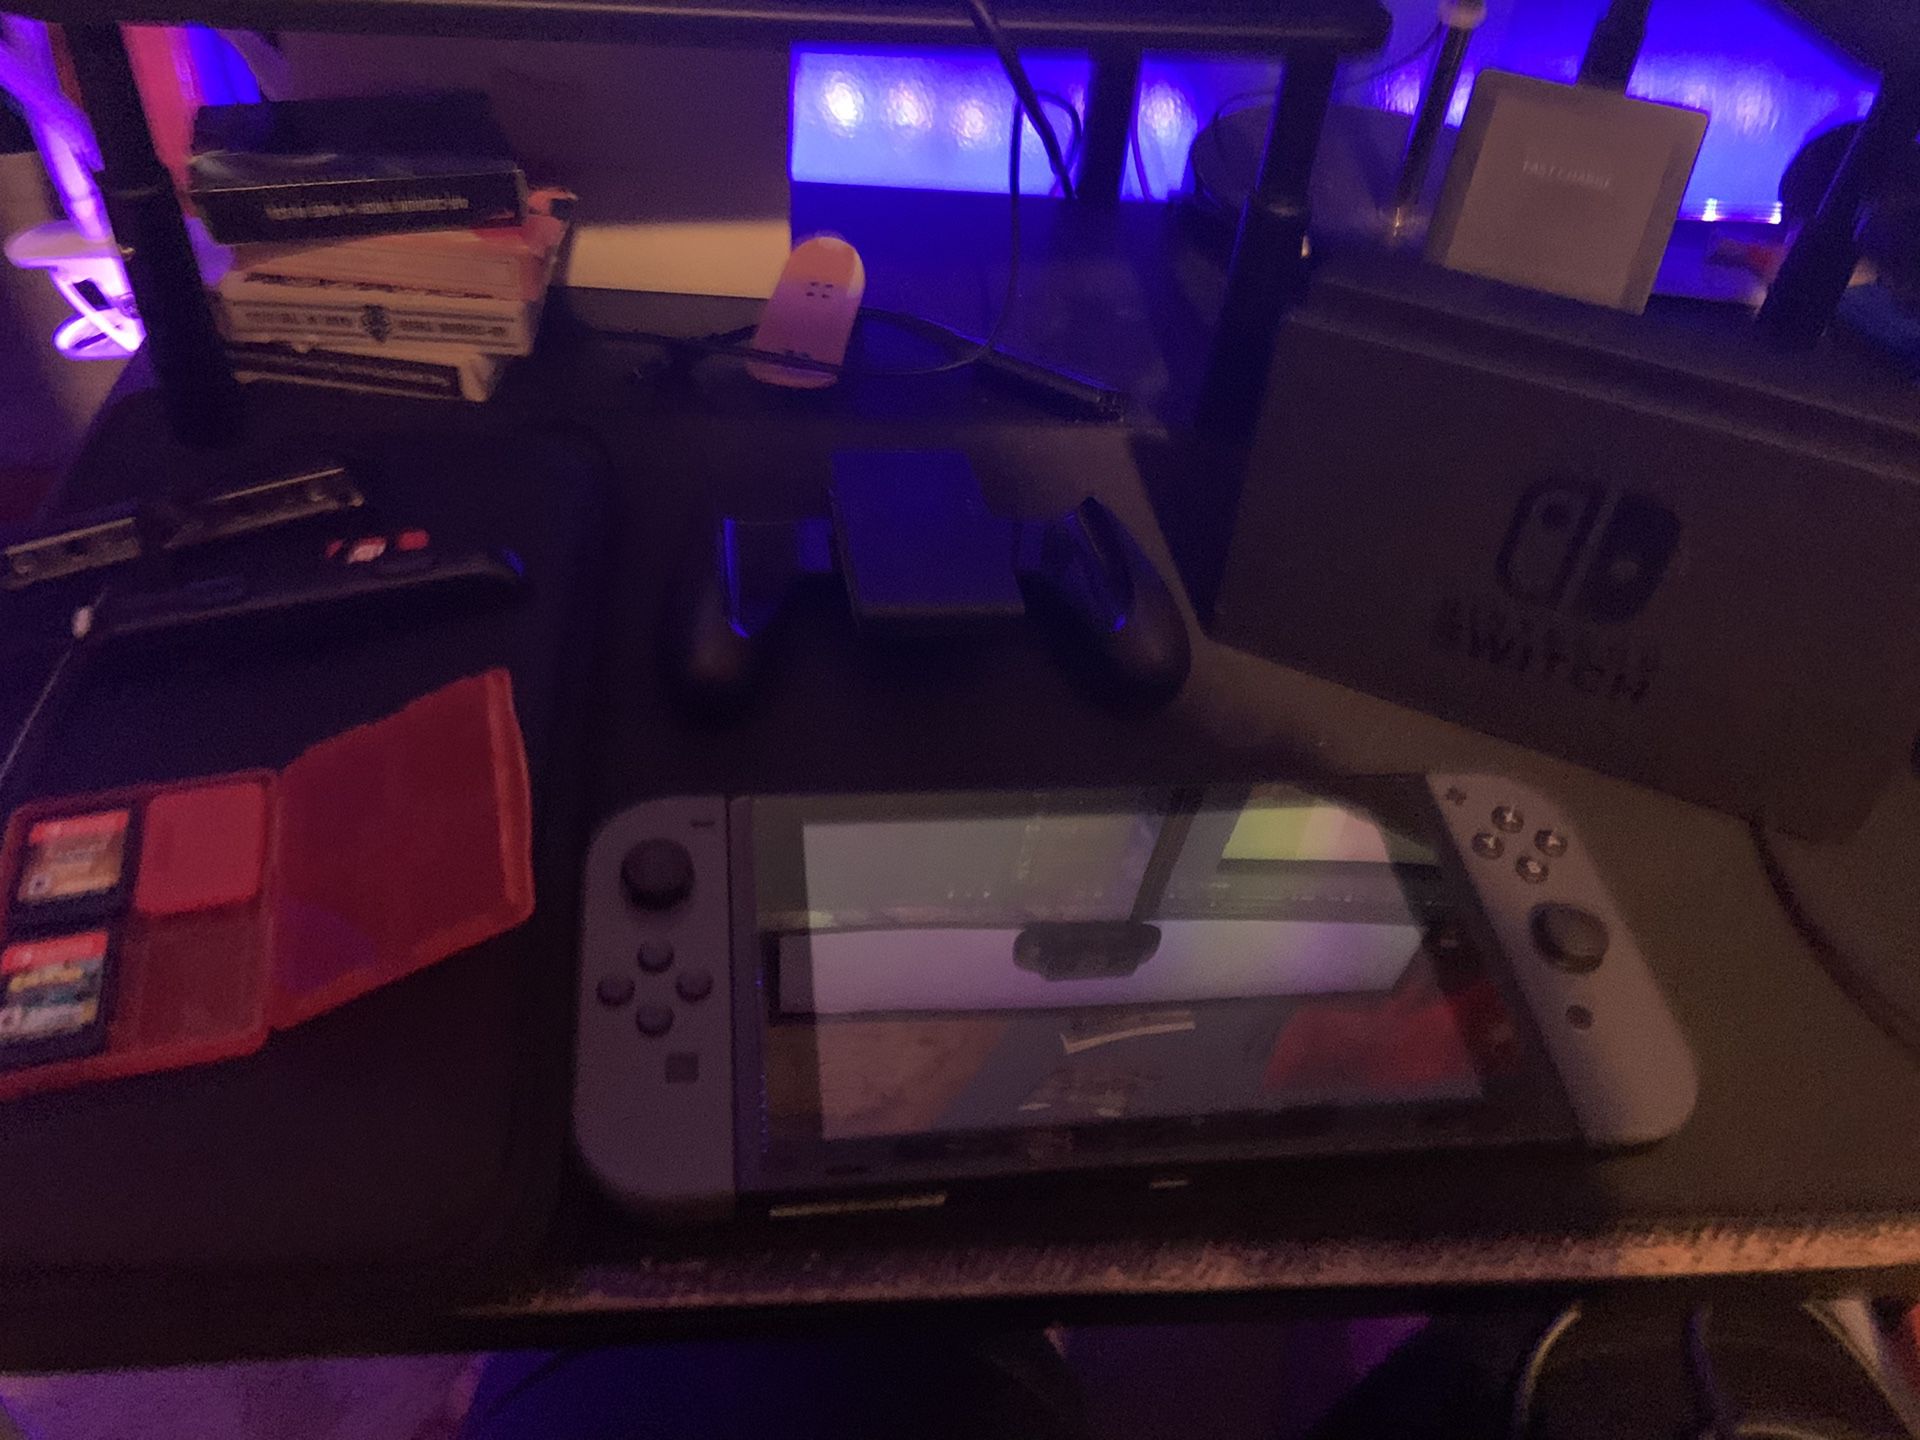 OG NINTENDO SWITCH - 32GB, Hac-001 Comes with 3 games, case, screen protector